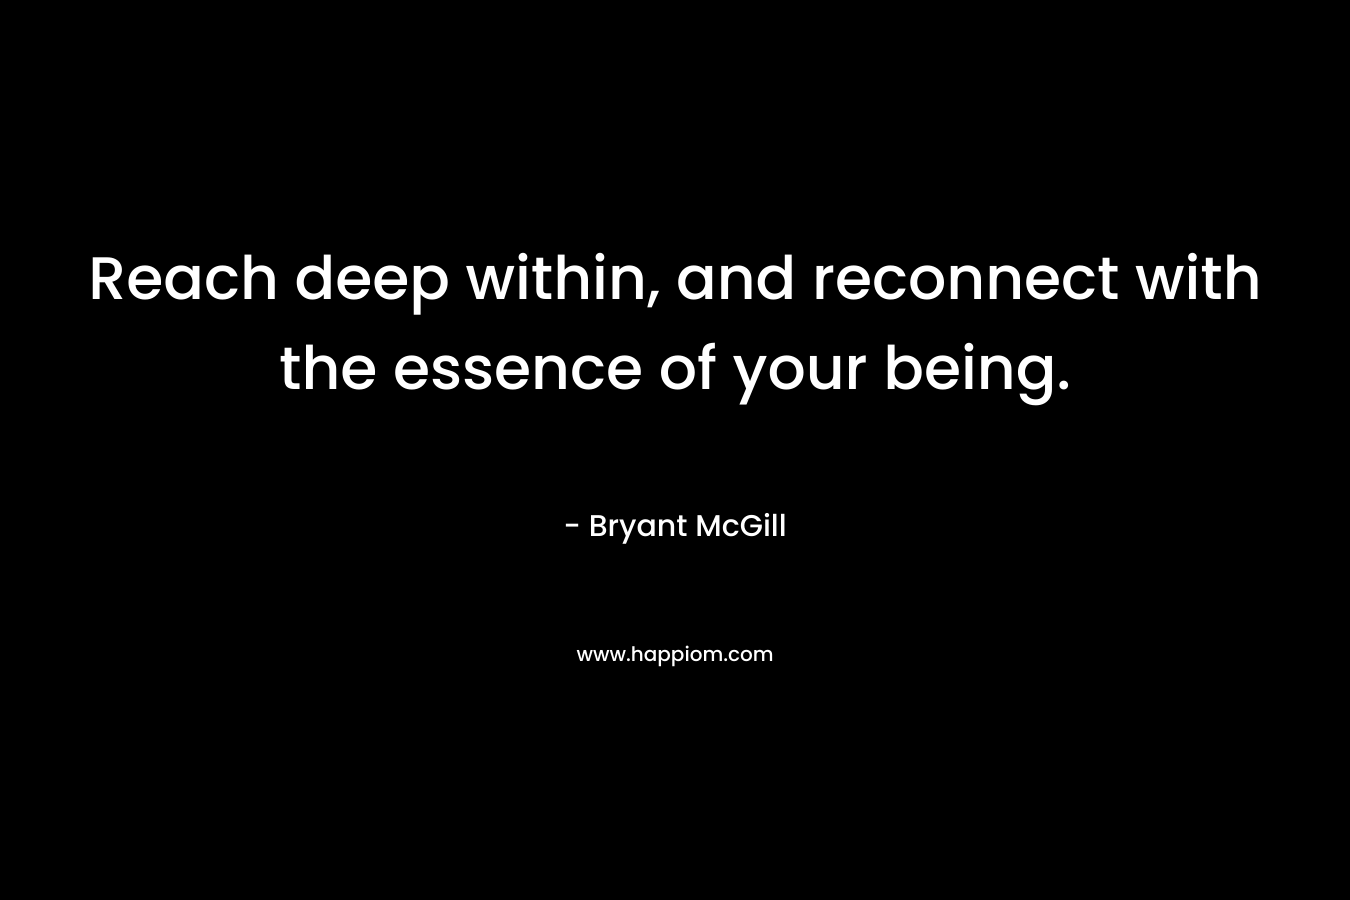 Reach deep within, and reconnect with the essence of your being.